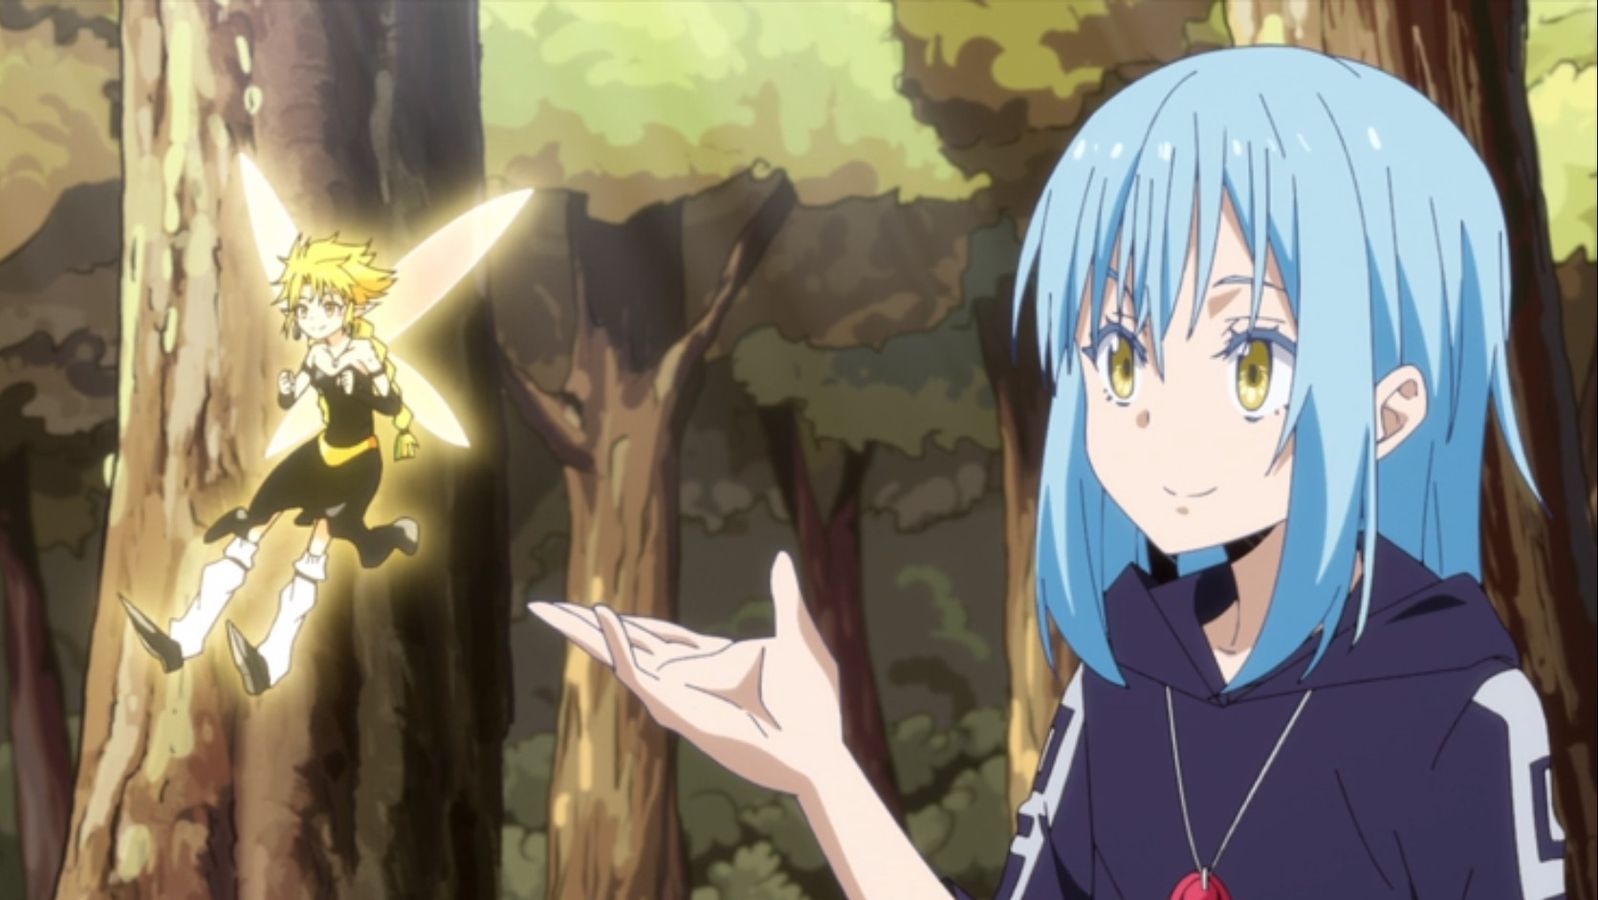 That Time I Got Reincarnated as a Slime Season 2 Part 2 Episode 7 Release Date and Time 2